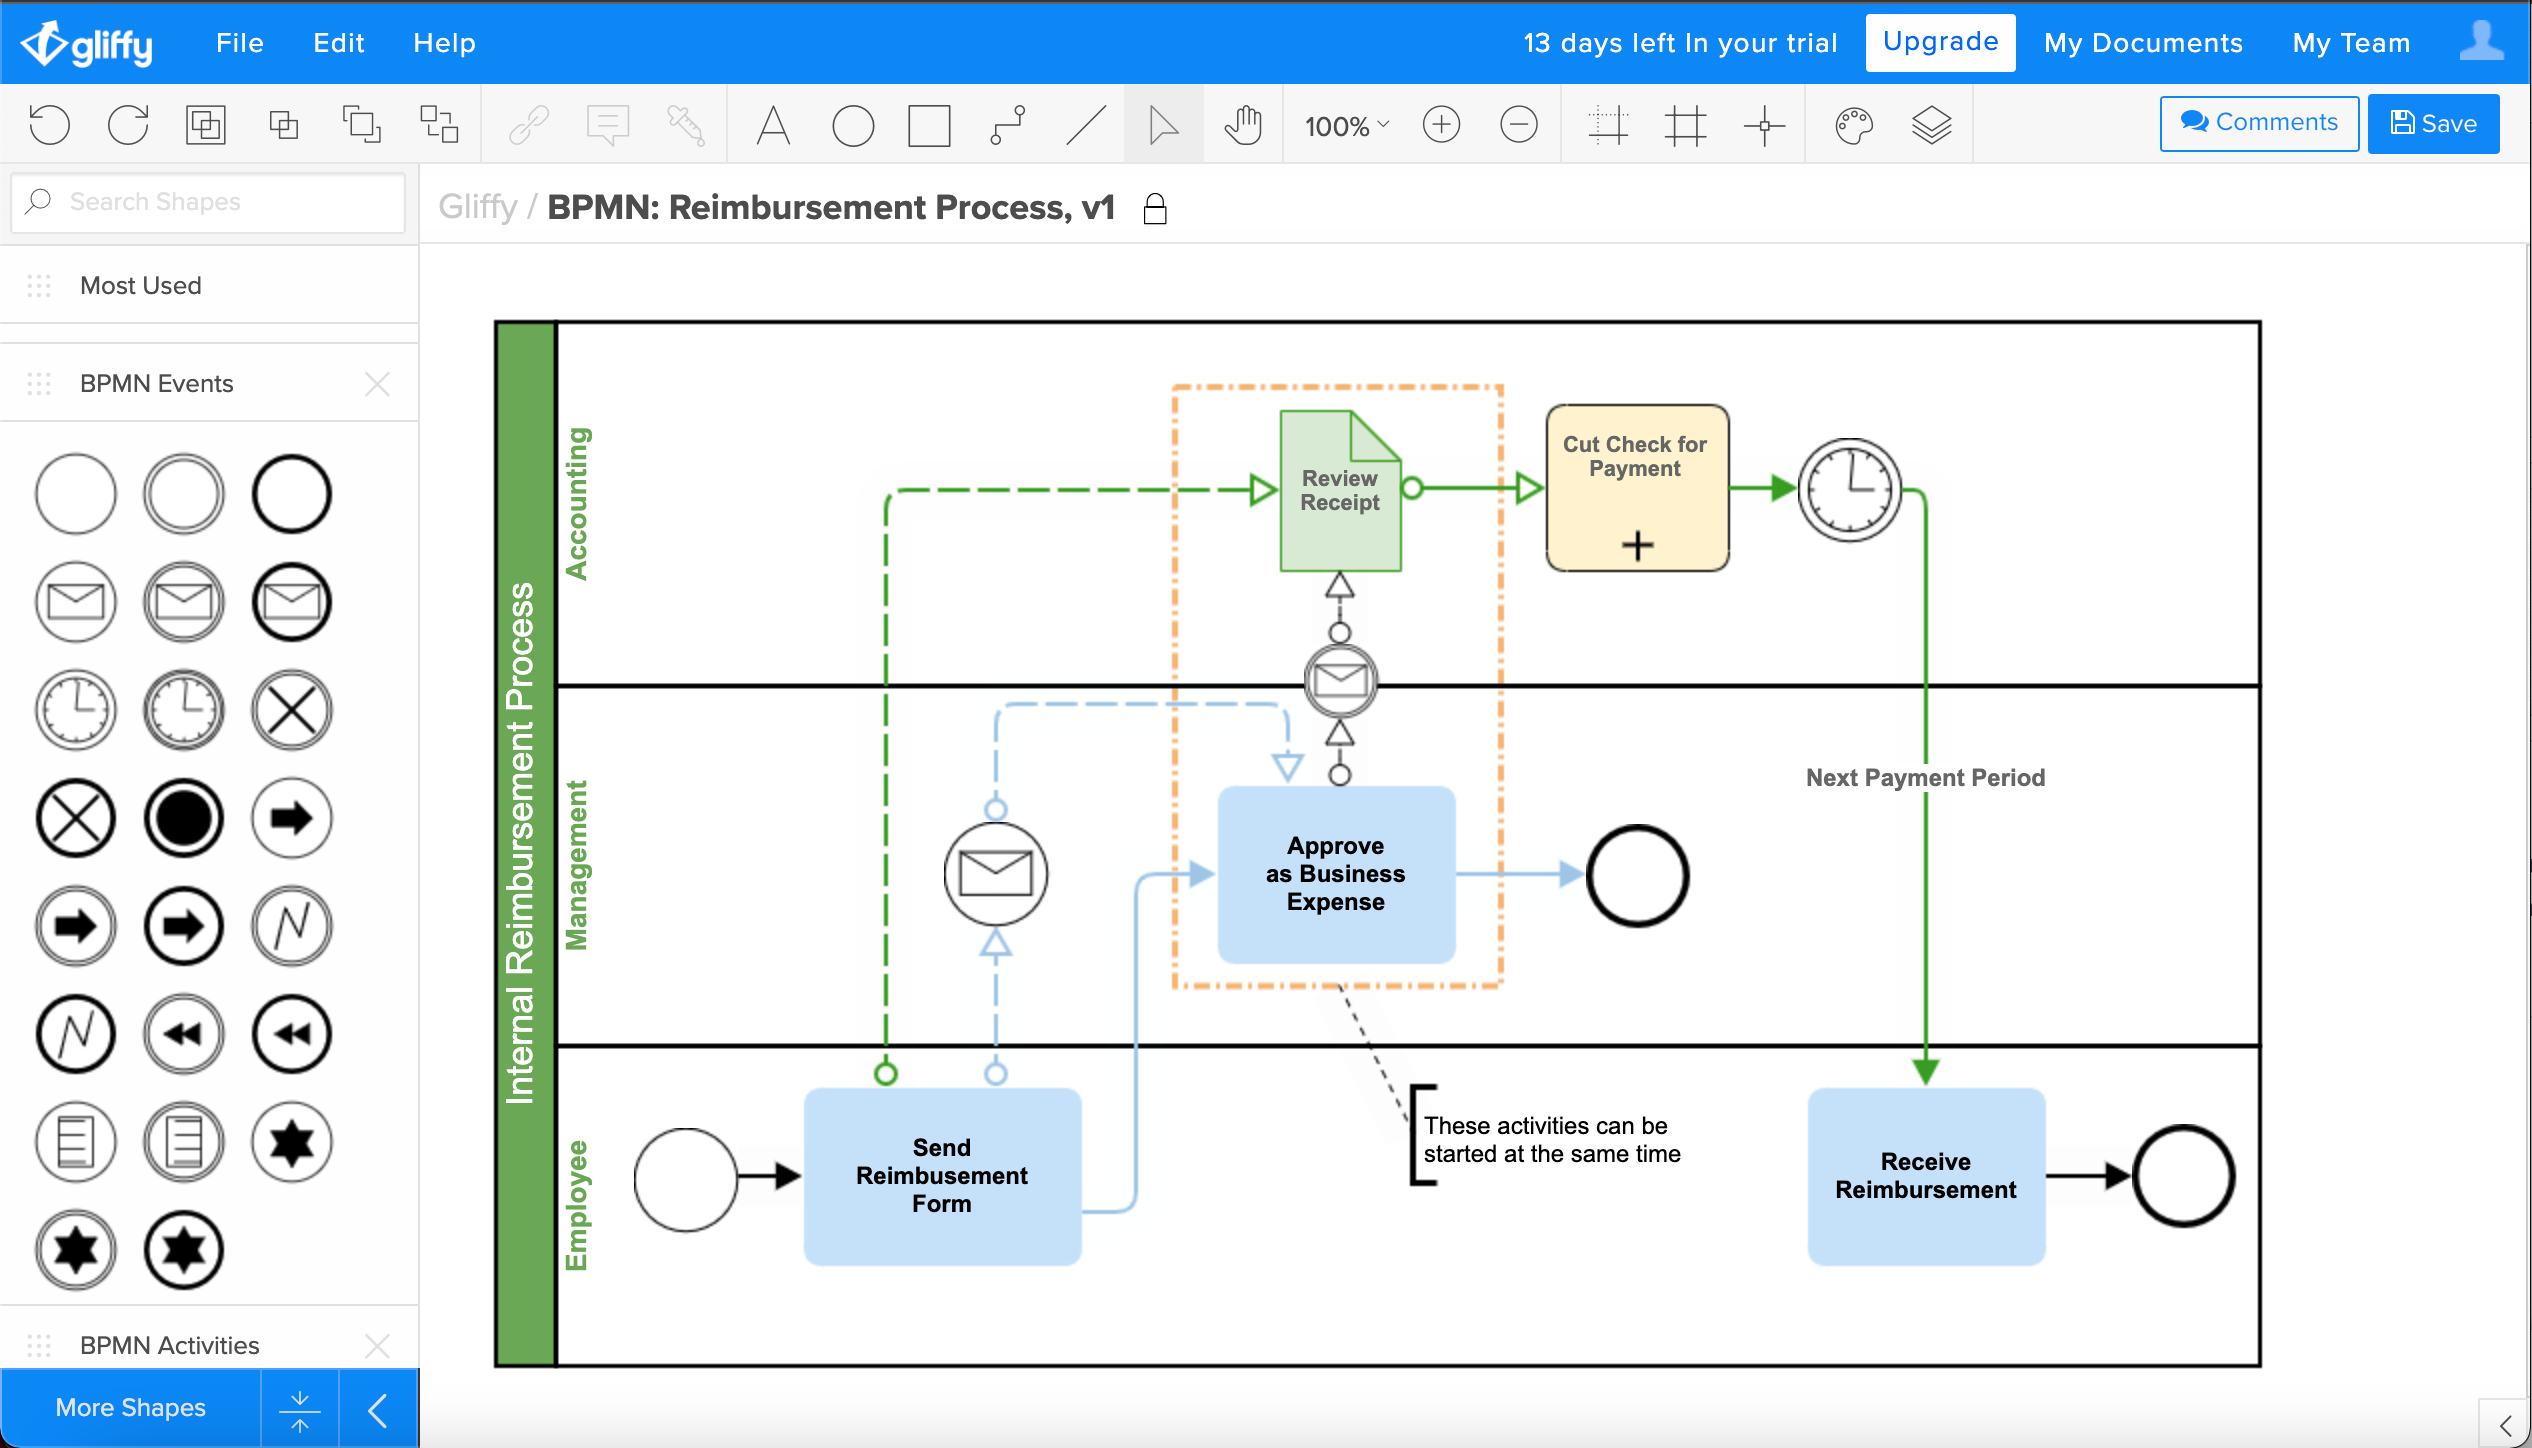 Whether you're mapping out a simple process or using formal notation like BPMN, Gliffy makes it easy to capture the step-by-step work and procedures that keep your business running smoothly.